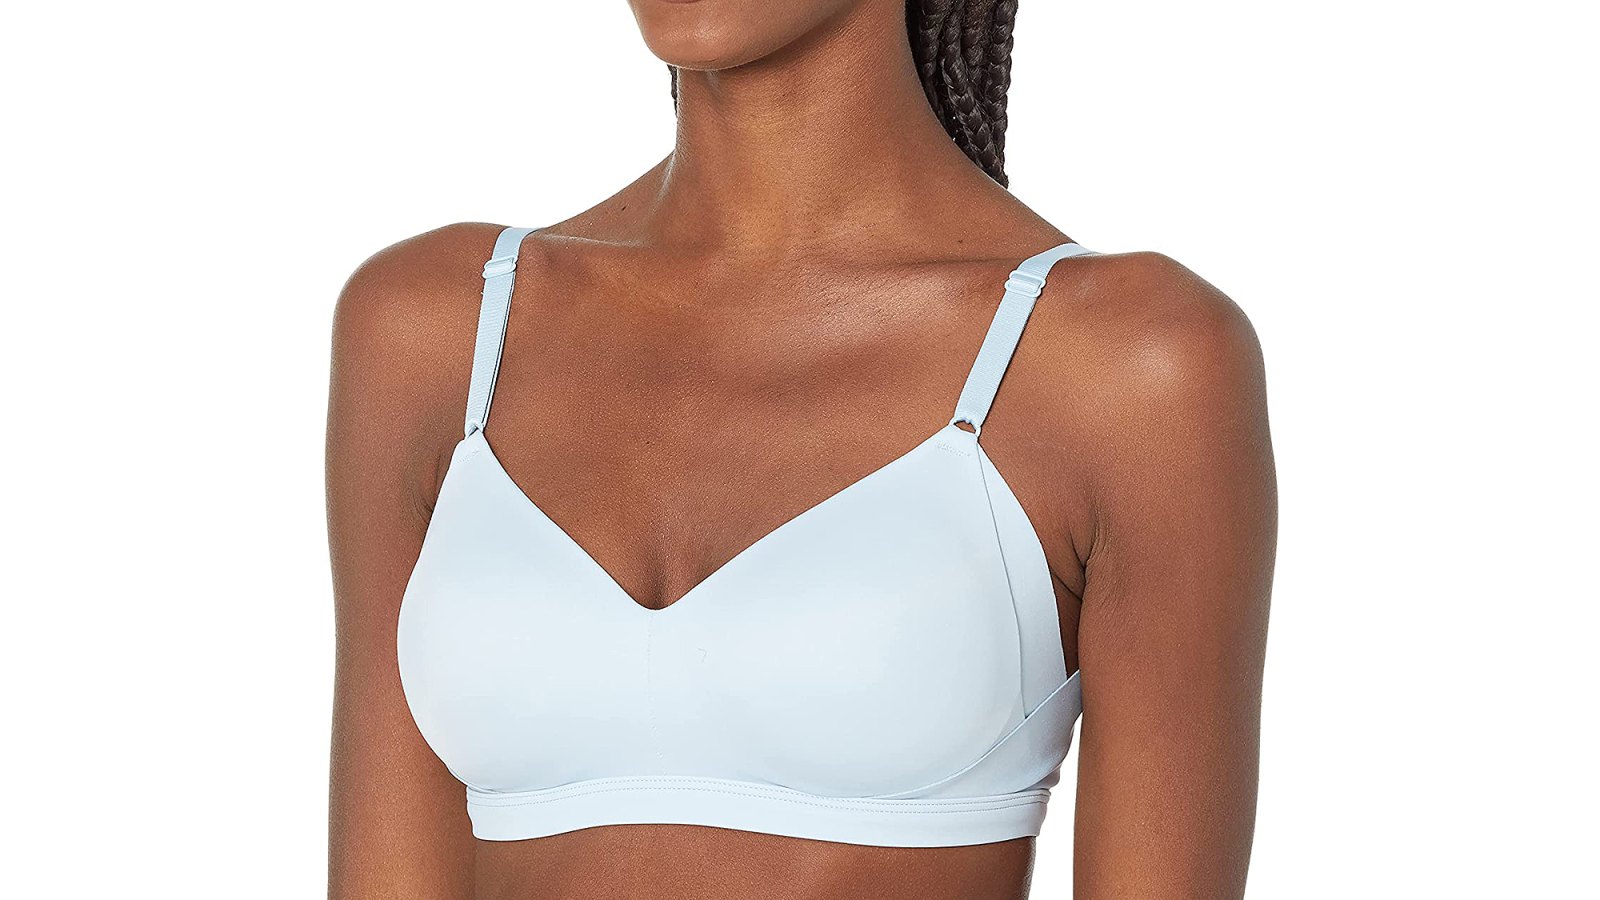 Tight Bra Effects - Learn about Side Effects of Wearing Tight Bras